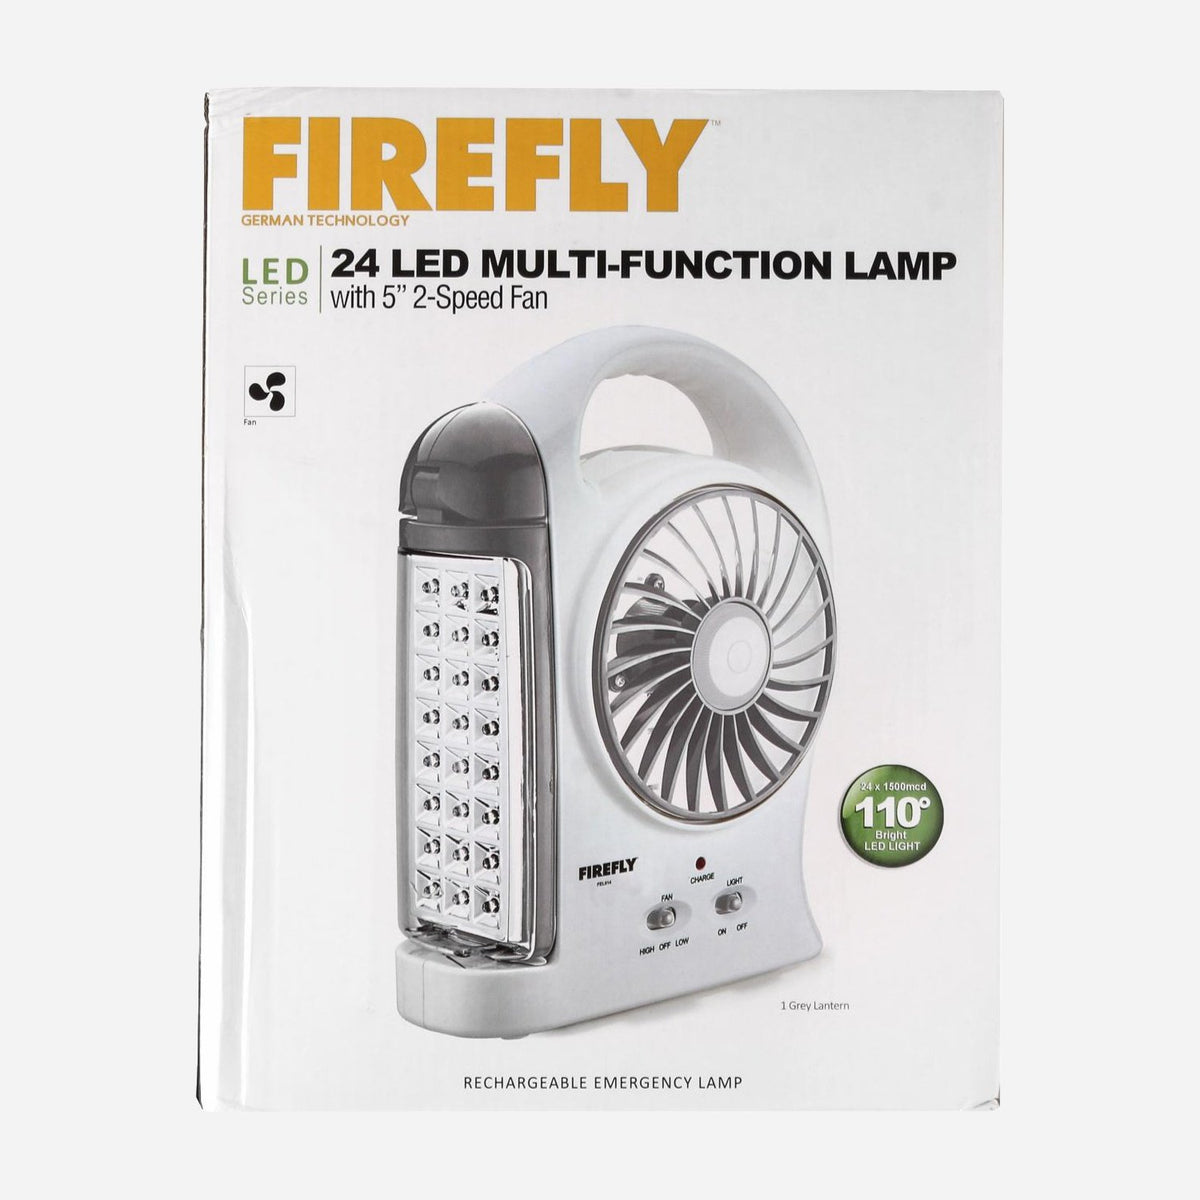 Firefly 24 LED Multi-function with 2-Speed Fan – AHPI